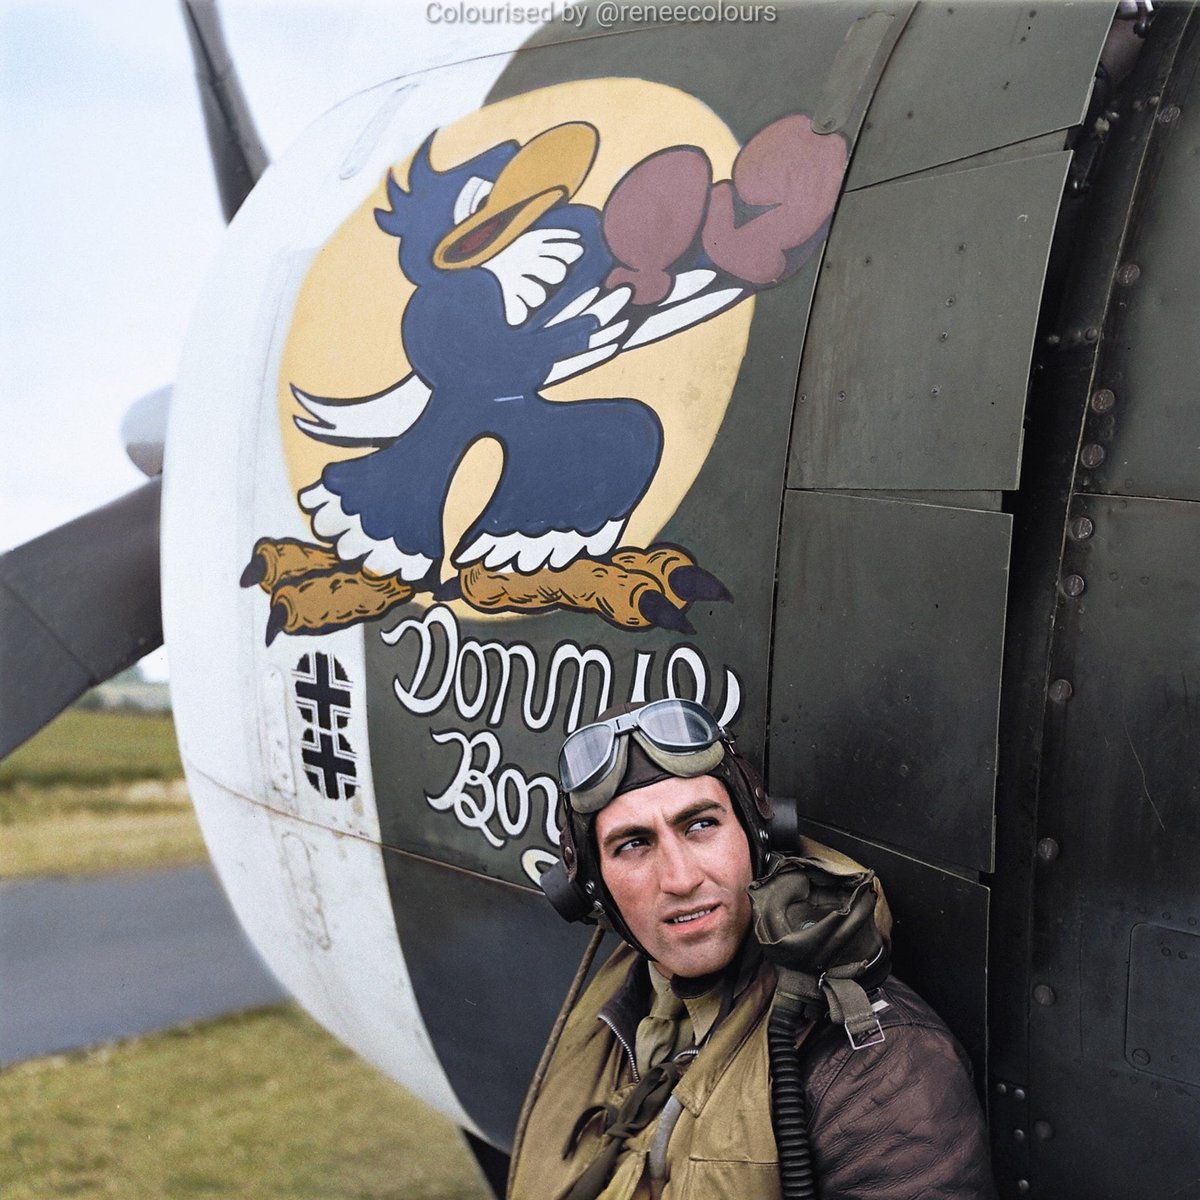 Dominic Salvatore 'Don' Gentile (December 6, 1920 – January 28, 1951), also known as 'Ace of Aces', was a World War II USAAF pilot who surpassed Eddie Rickenbacker's World War I record of 26 downed aircraft. He later served in the post-war U.S. Air Force.